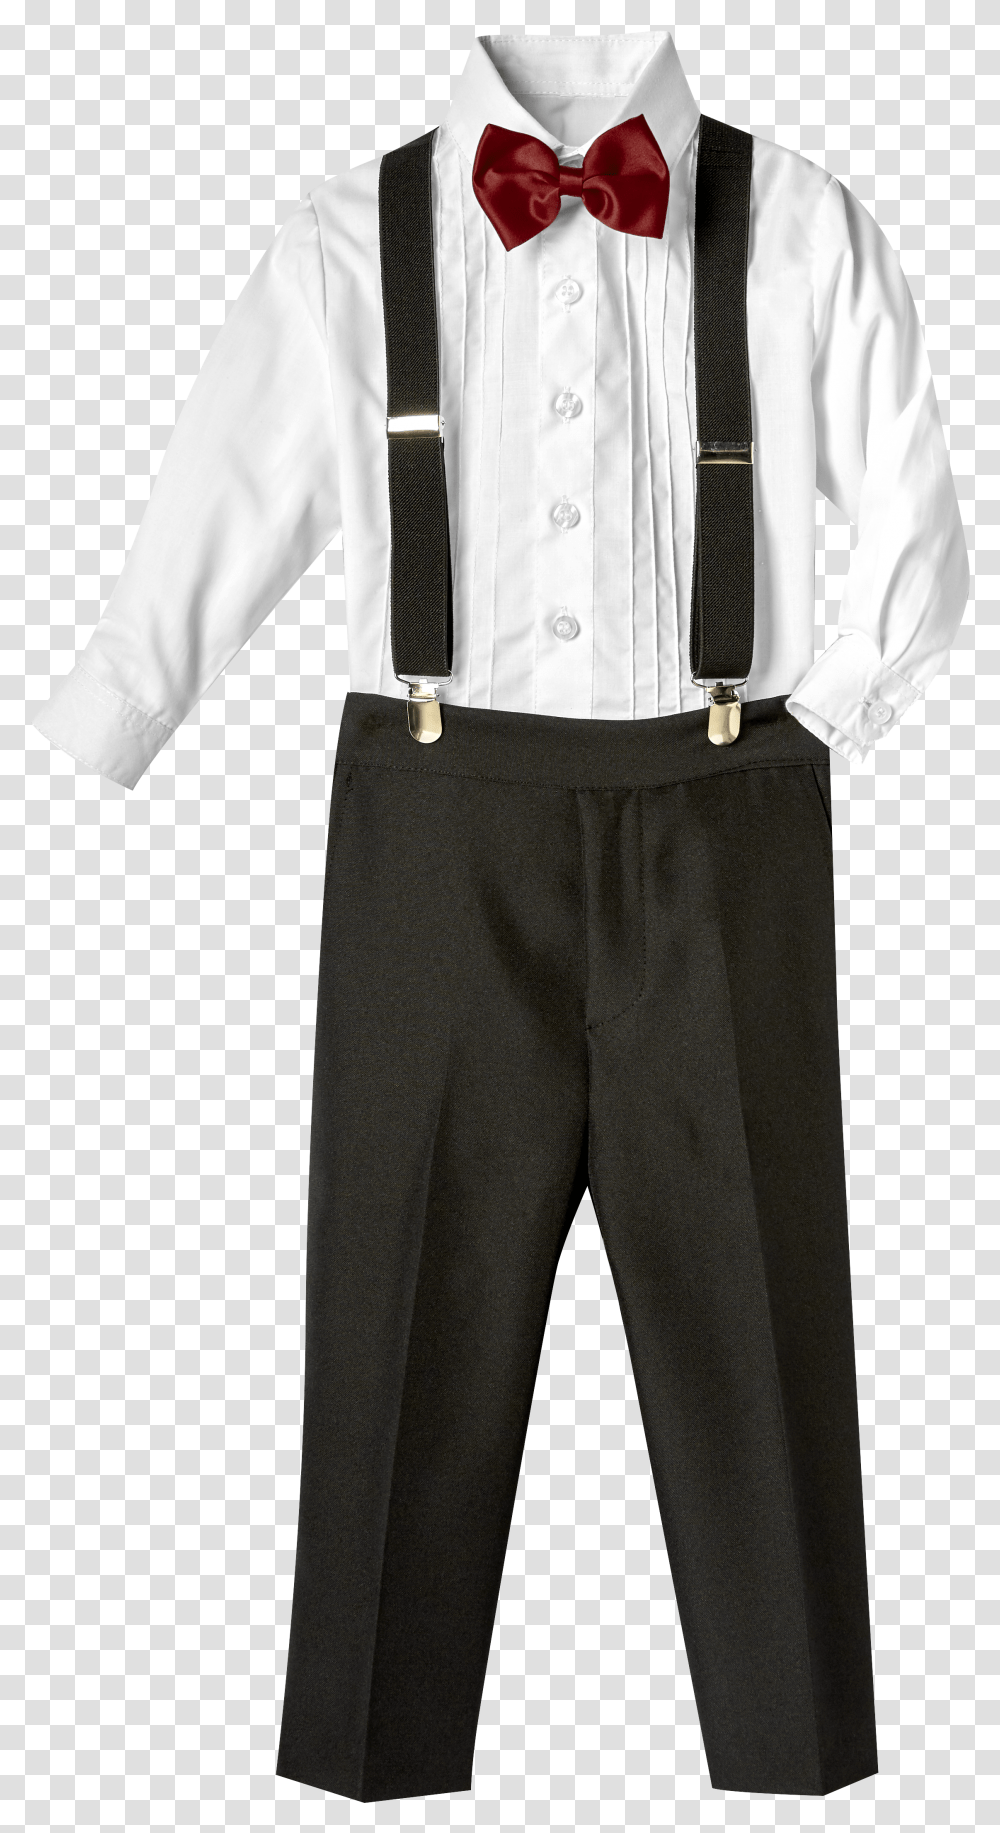 Black Shirt With Red Bow Tie And Suspenders Solid Transparent Png